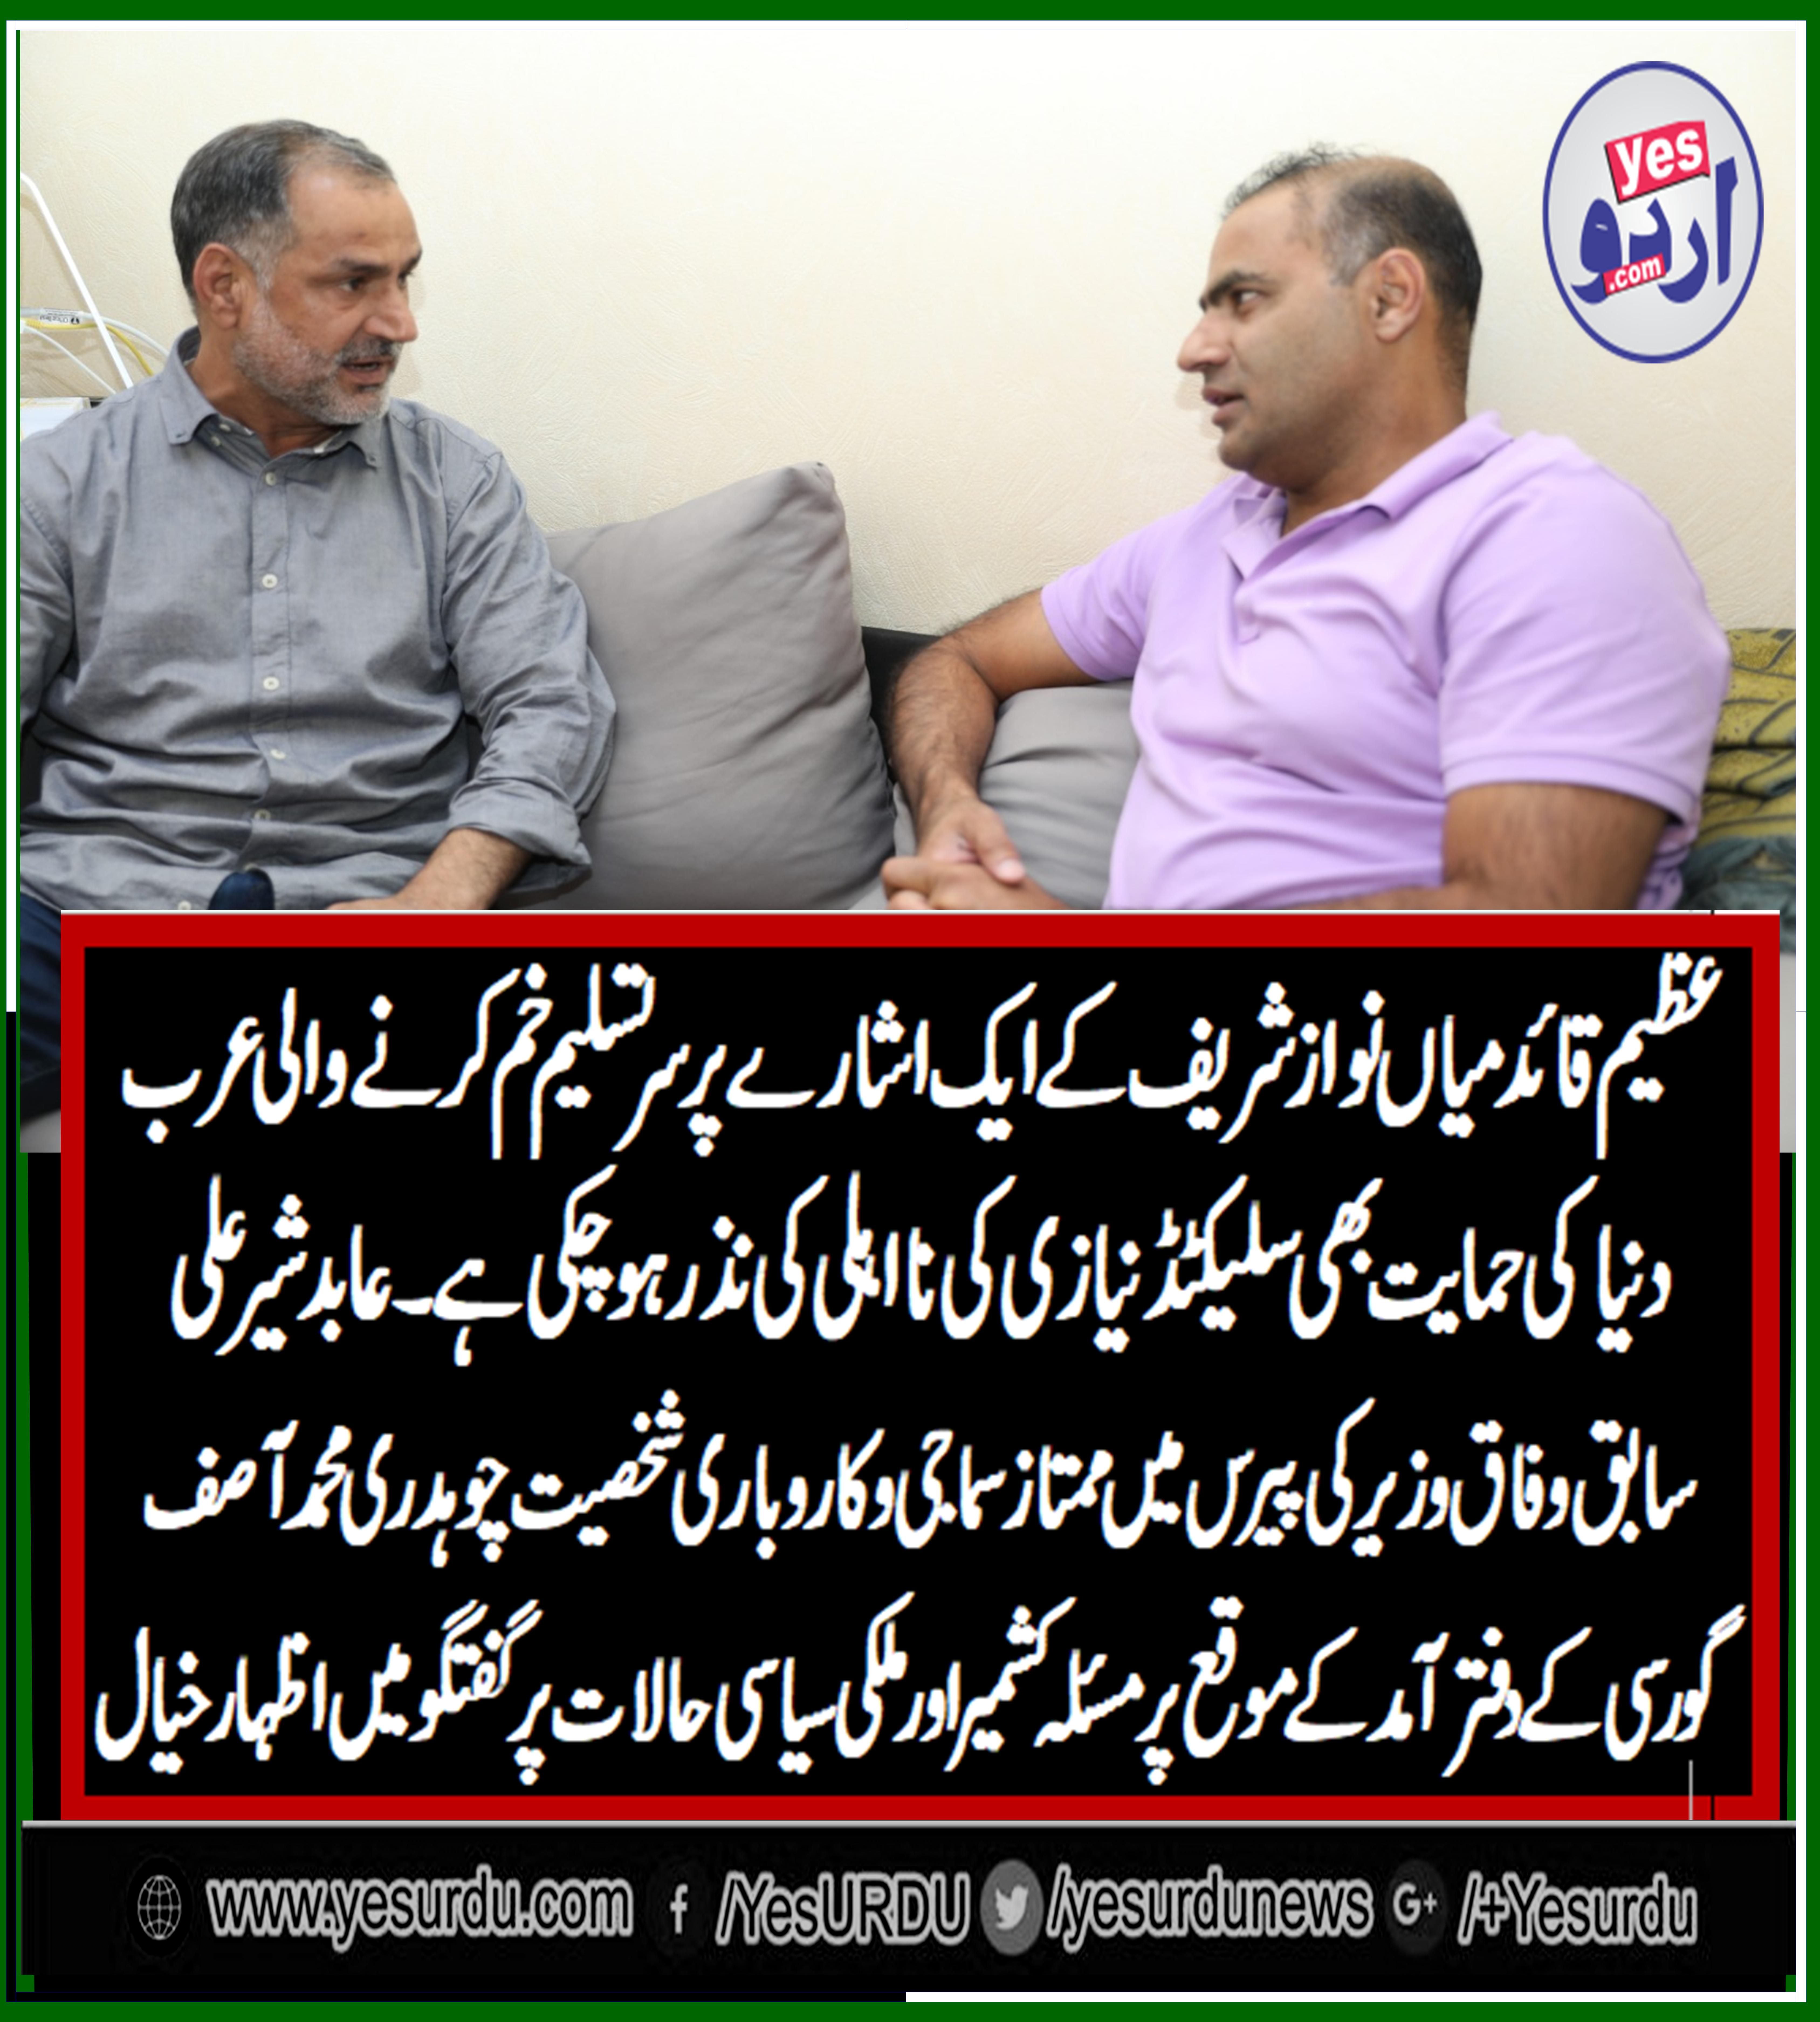 CH ABID SHER ALI, VISITED, FRANCE, IN, A, MEETING, WITH, CH ASIF GORSI, HE SAID, GULF, COUNTRIES, ARE AVOIDING, TO, TALK, SELECTED, JUST, BECAUSE, OF, HIS, BEHAVIOR